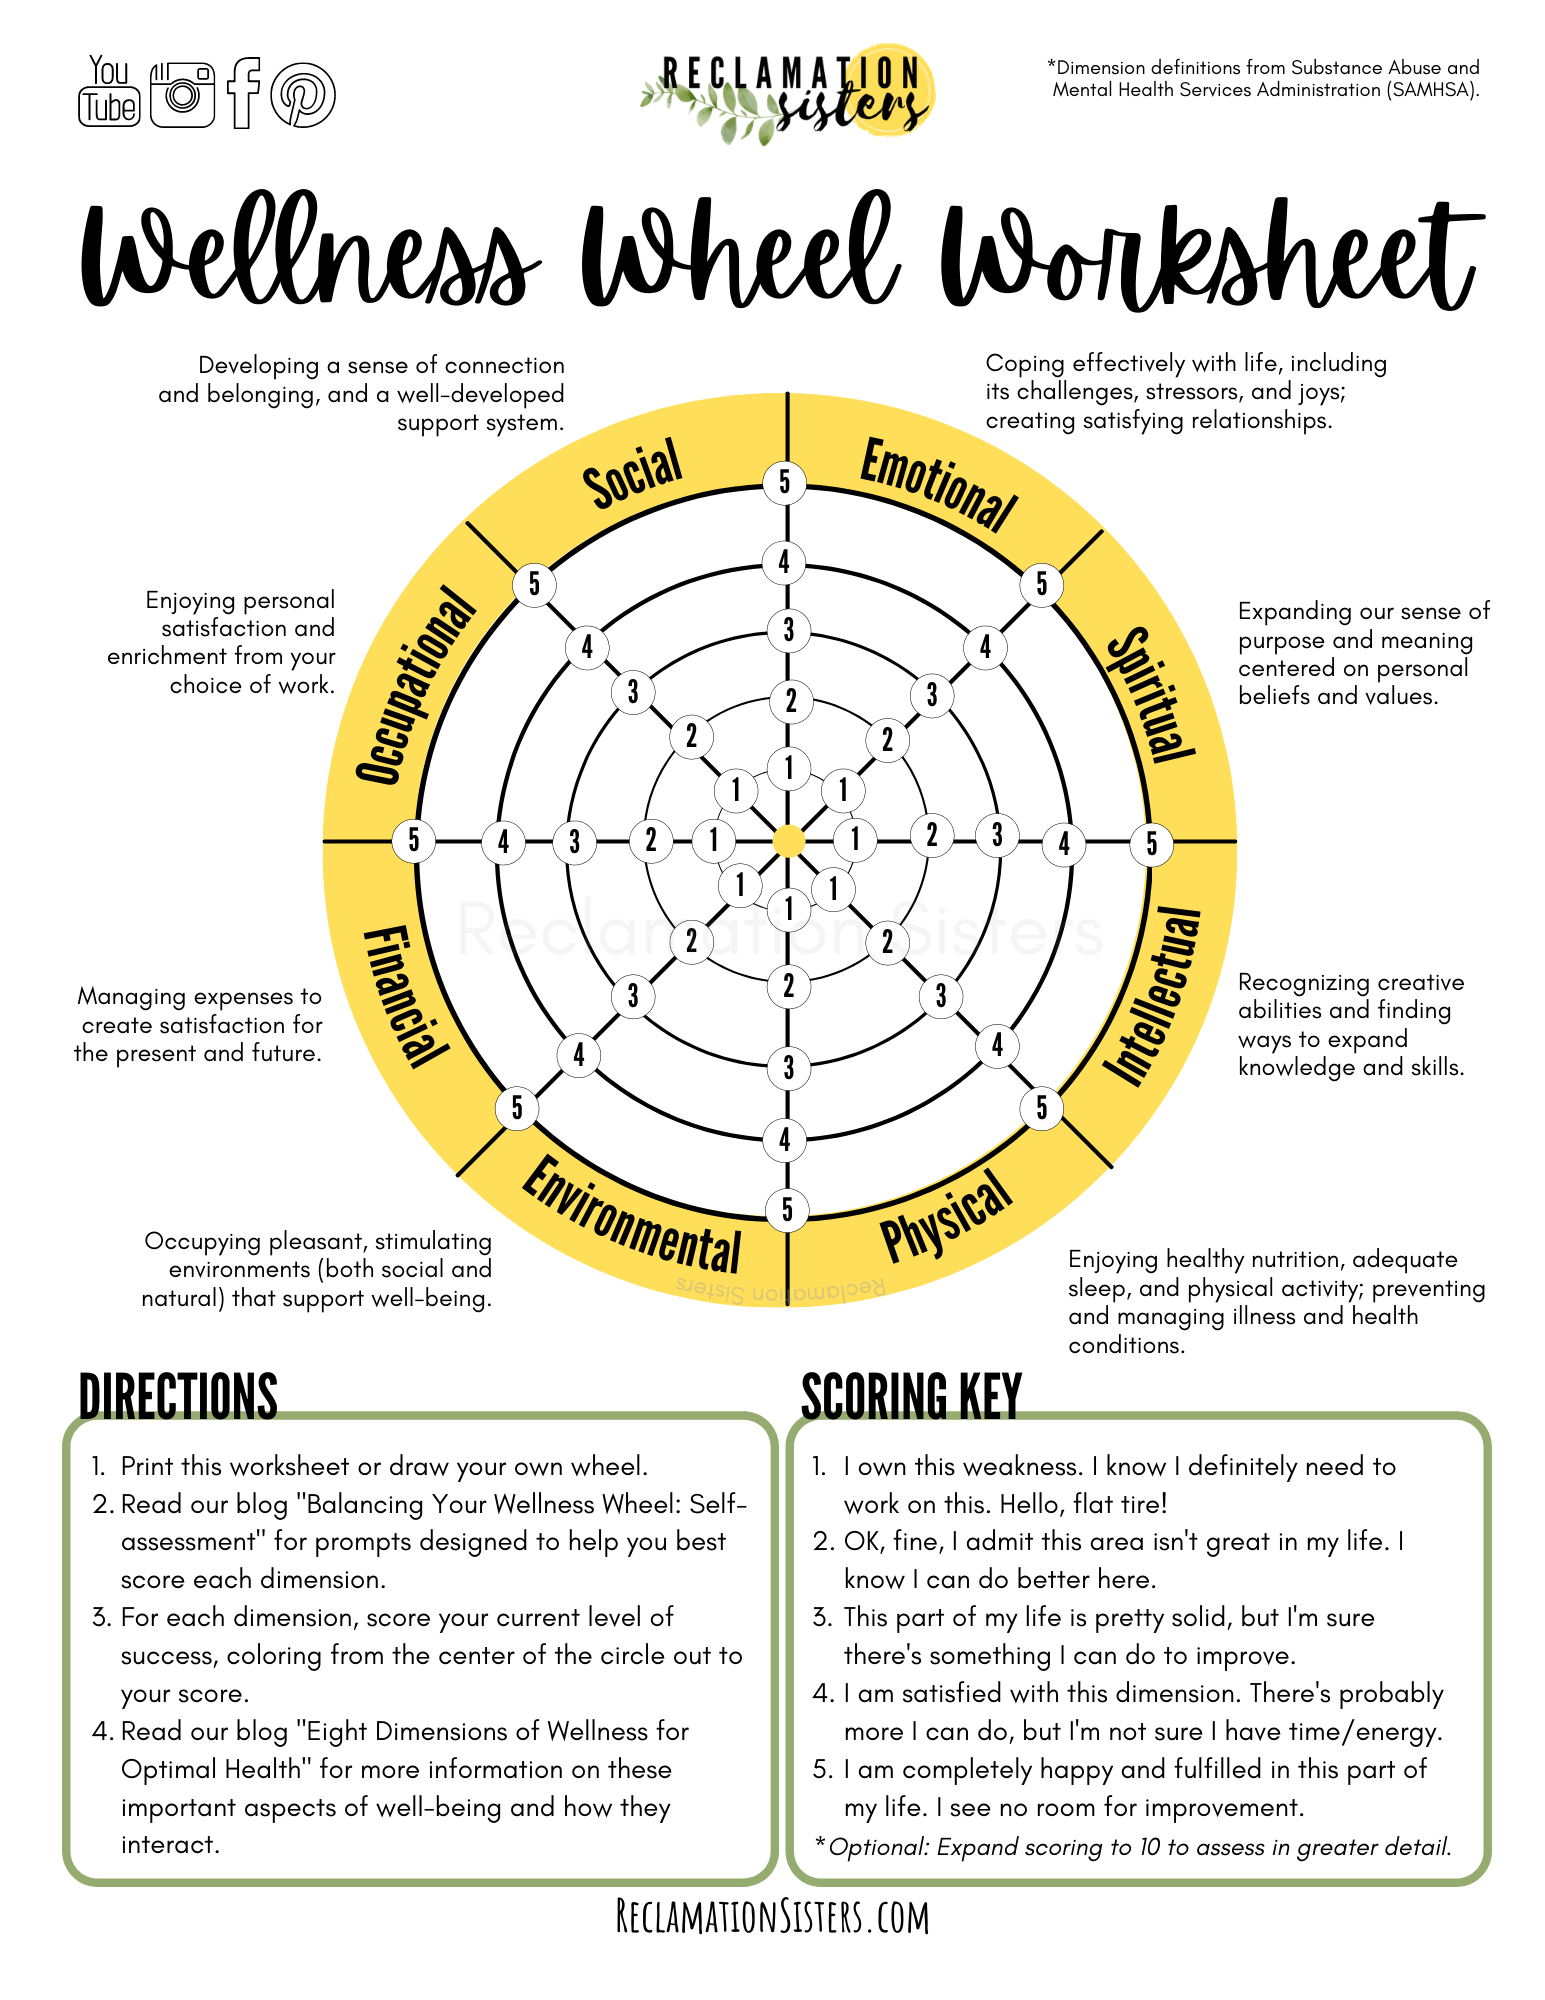 Balancing Your Wellness Wheel: Self assessment Reclamation Sisters